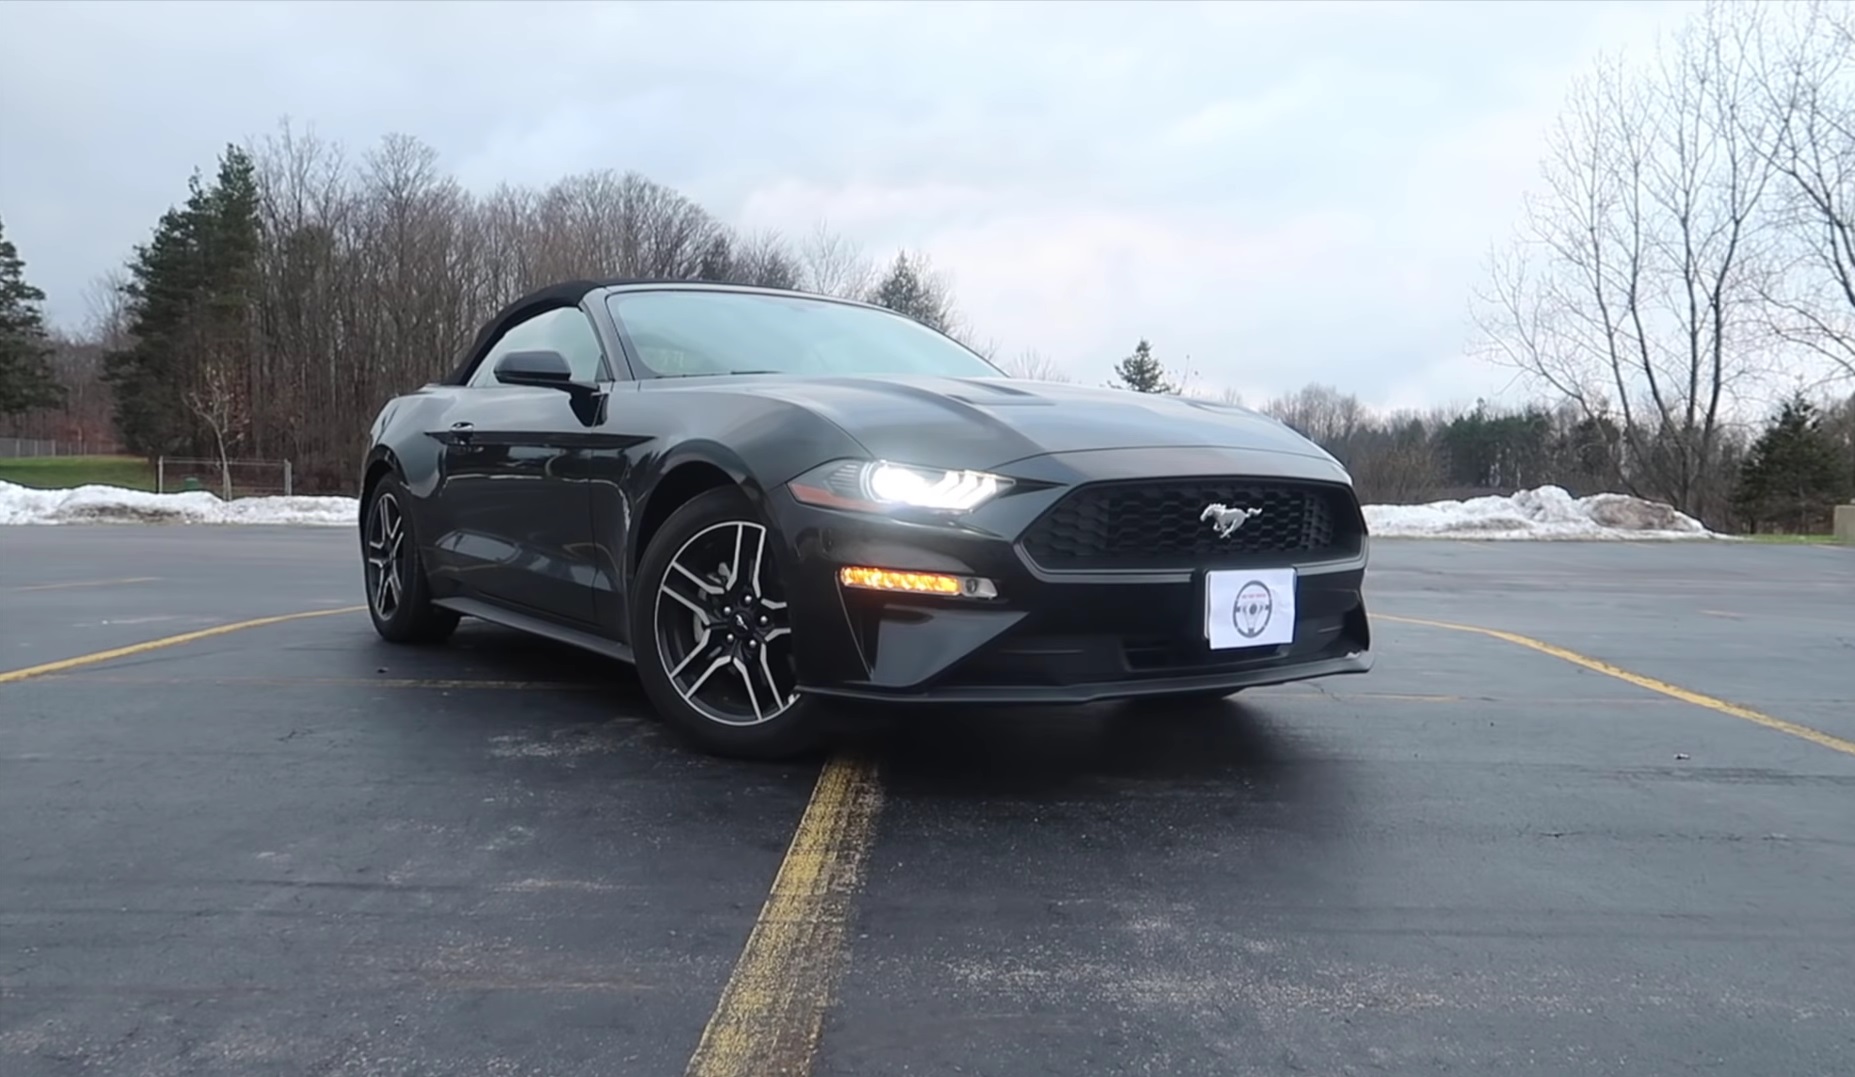 Video: 2019 Ford Mustang EcoBoost - Full Review & Test Drive